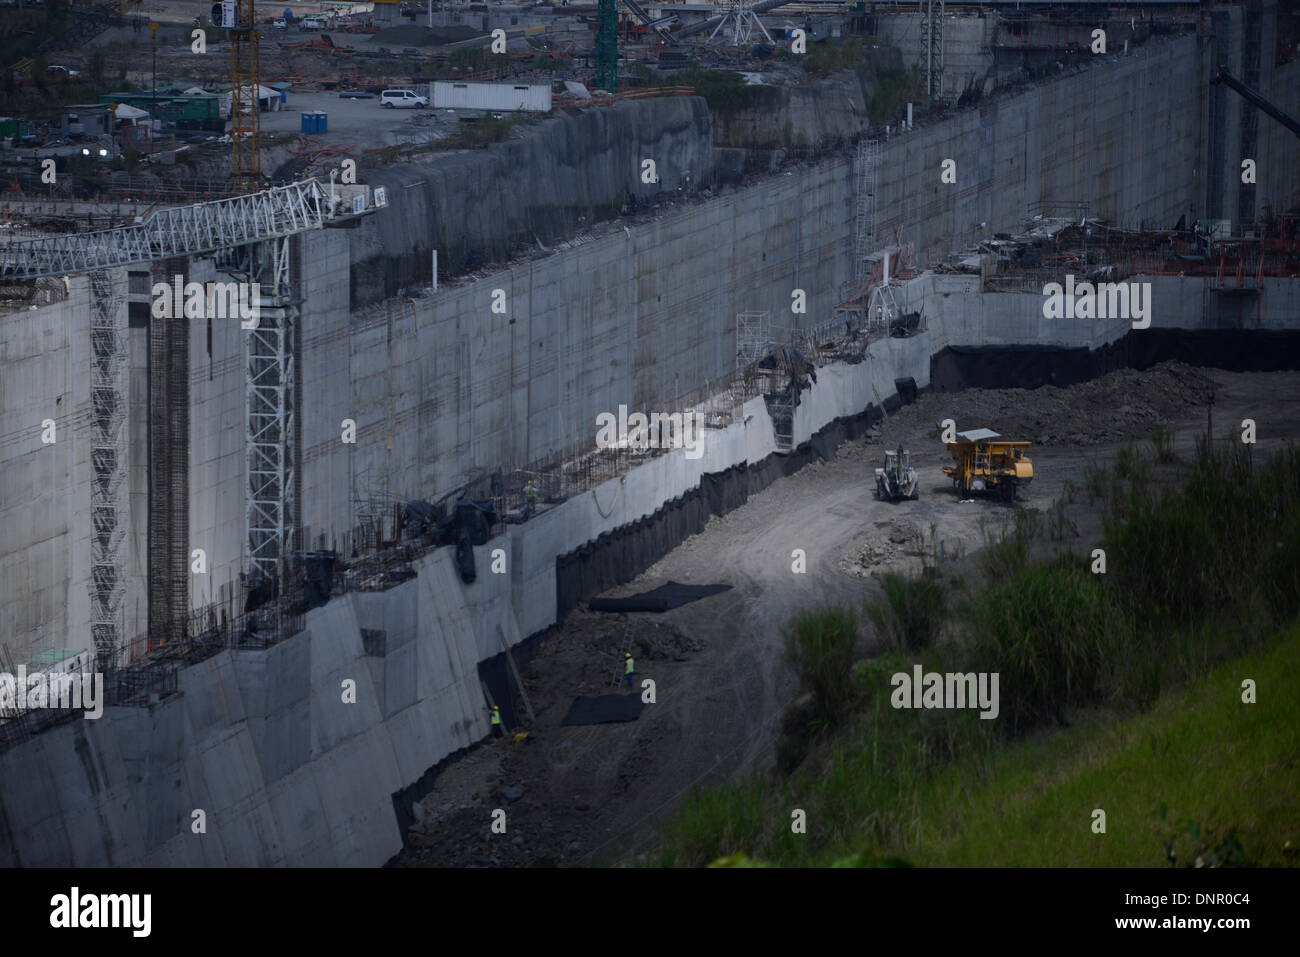 Colon. 4th Jan, 2014. Photo taken on Jan. 3, 2014 shows the expansion project of Panama Canal in Colon, Panama. The consortium expanding the capacity of the Panama Canal threatened to halt construction due to breaches of contract. © Mauricio Valenzuela/Xinhua/Alamy Live News Stock Photo